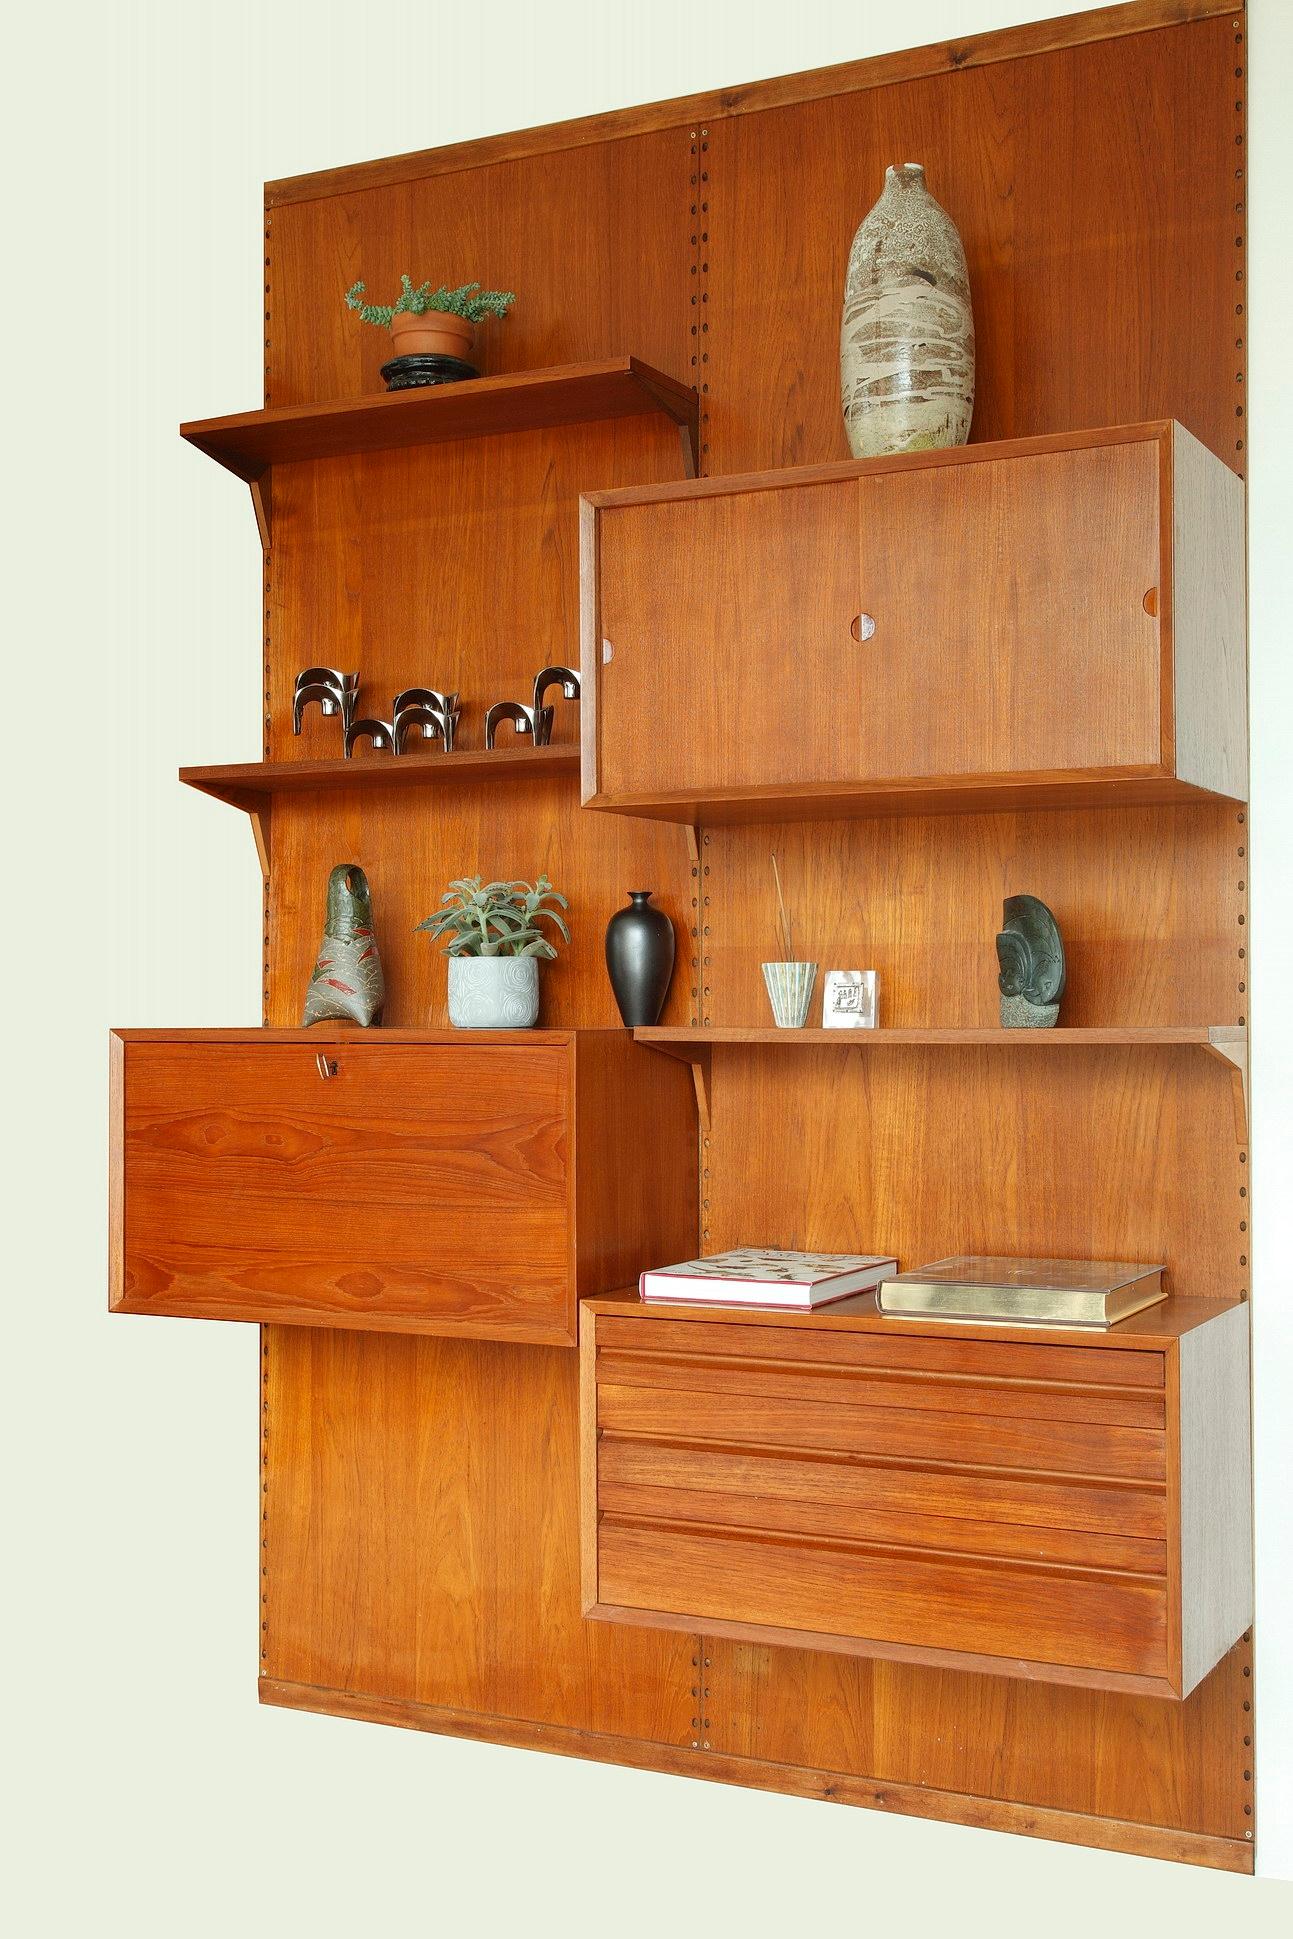 Poul Cadovius wall unit crafted of teak in the 1960s. This modular Scandinavian shelving system consists of two vertical panels with shelves and cabinet units:
- 3 shelves (P 22cm)
- 1 cabinet unit with sliding doors (P 42cm, H 38cm)
- 1 cabinet